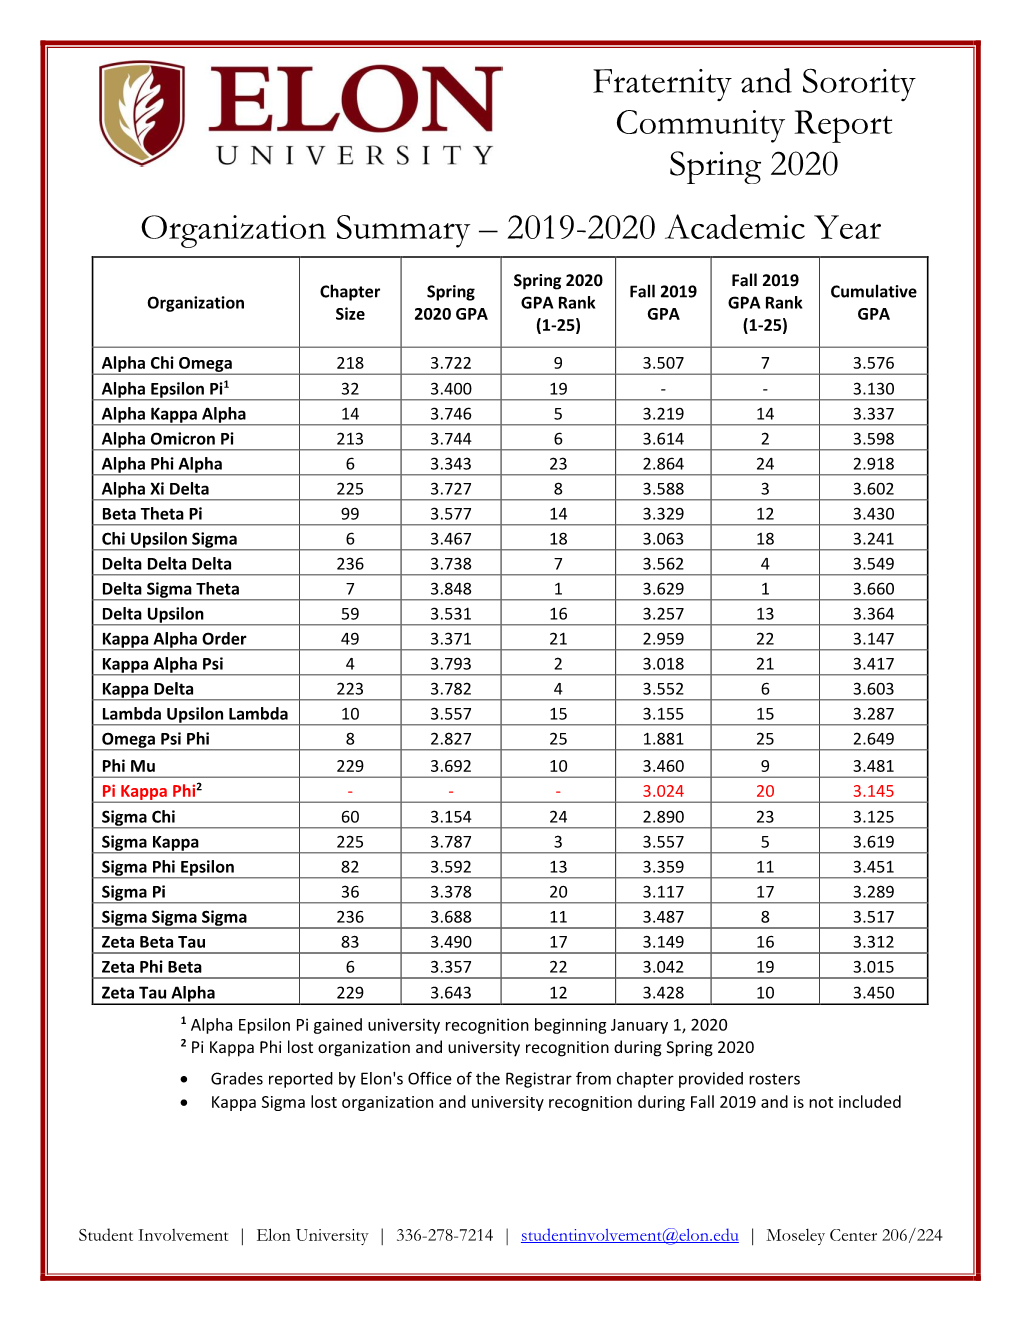 Spring 2020 Fraternity and Sorority Community Report